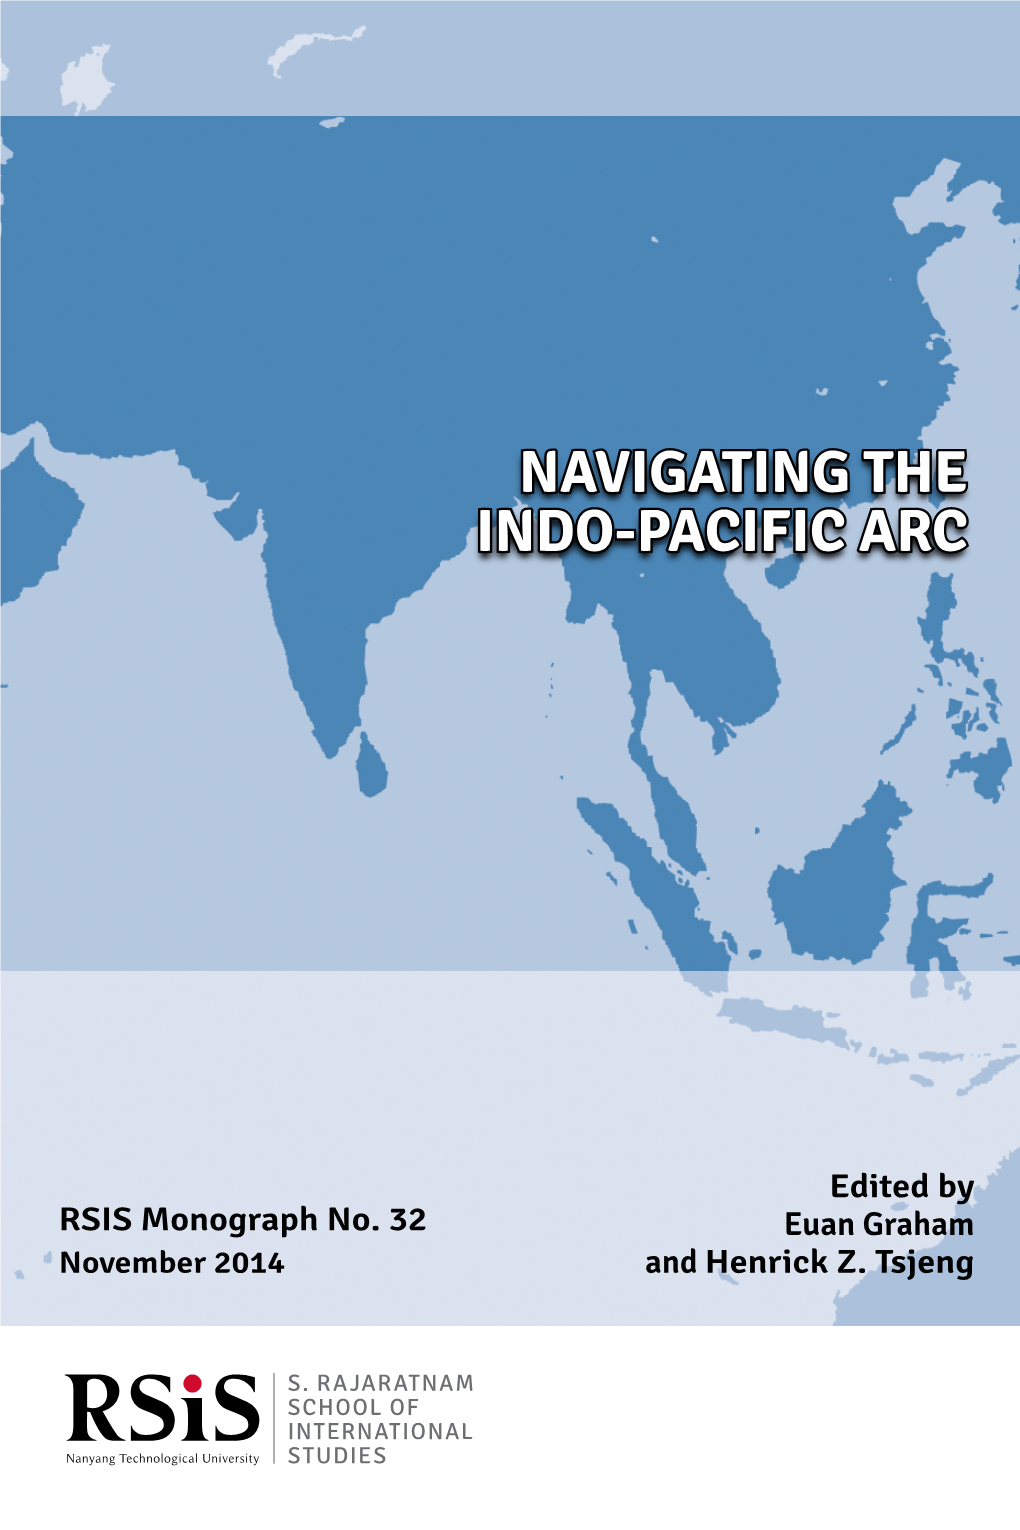 Navigating the Indo-Pacific Arc”